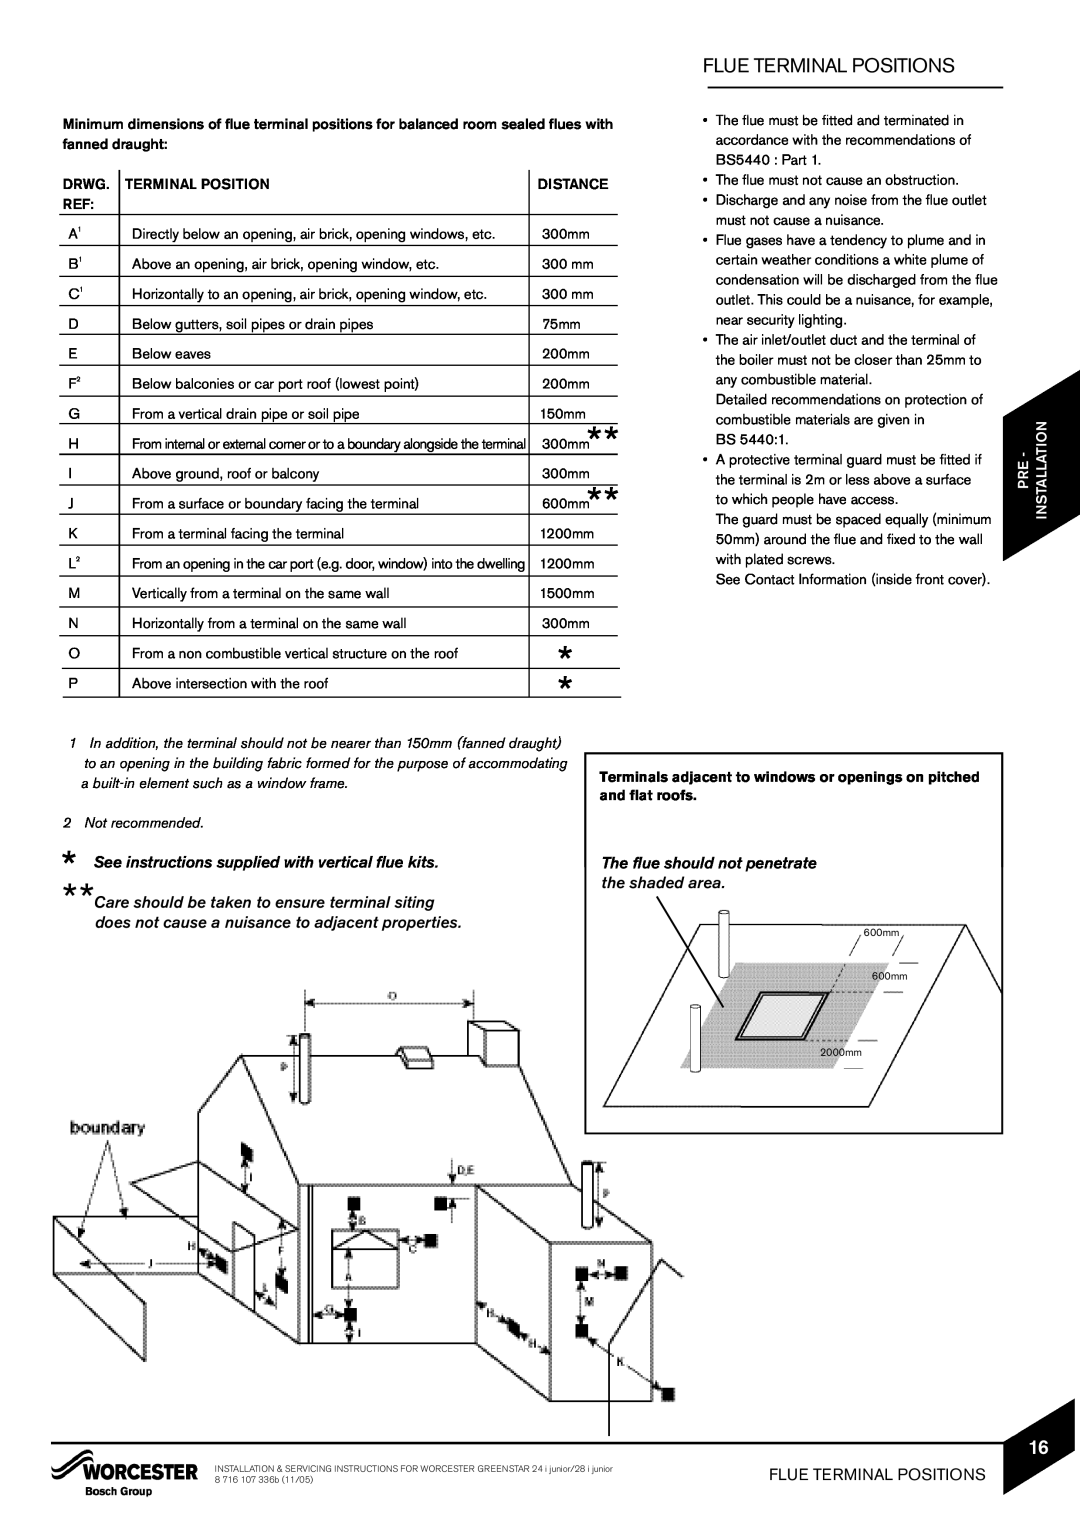 Bosch Appliances 24i junior Flue Terminal Positions, The flue should not penetrate the shaded area, Pre - Installation 